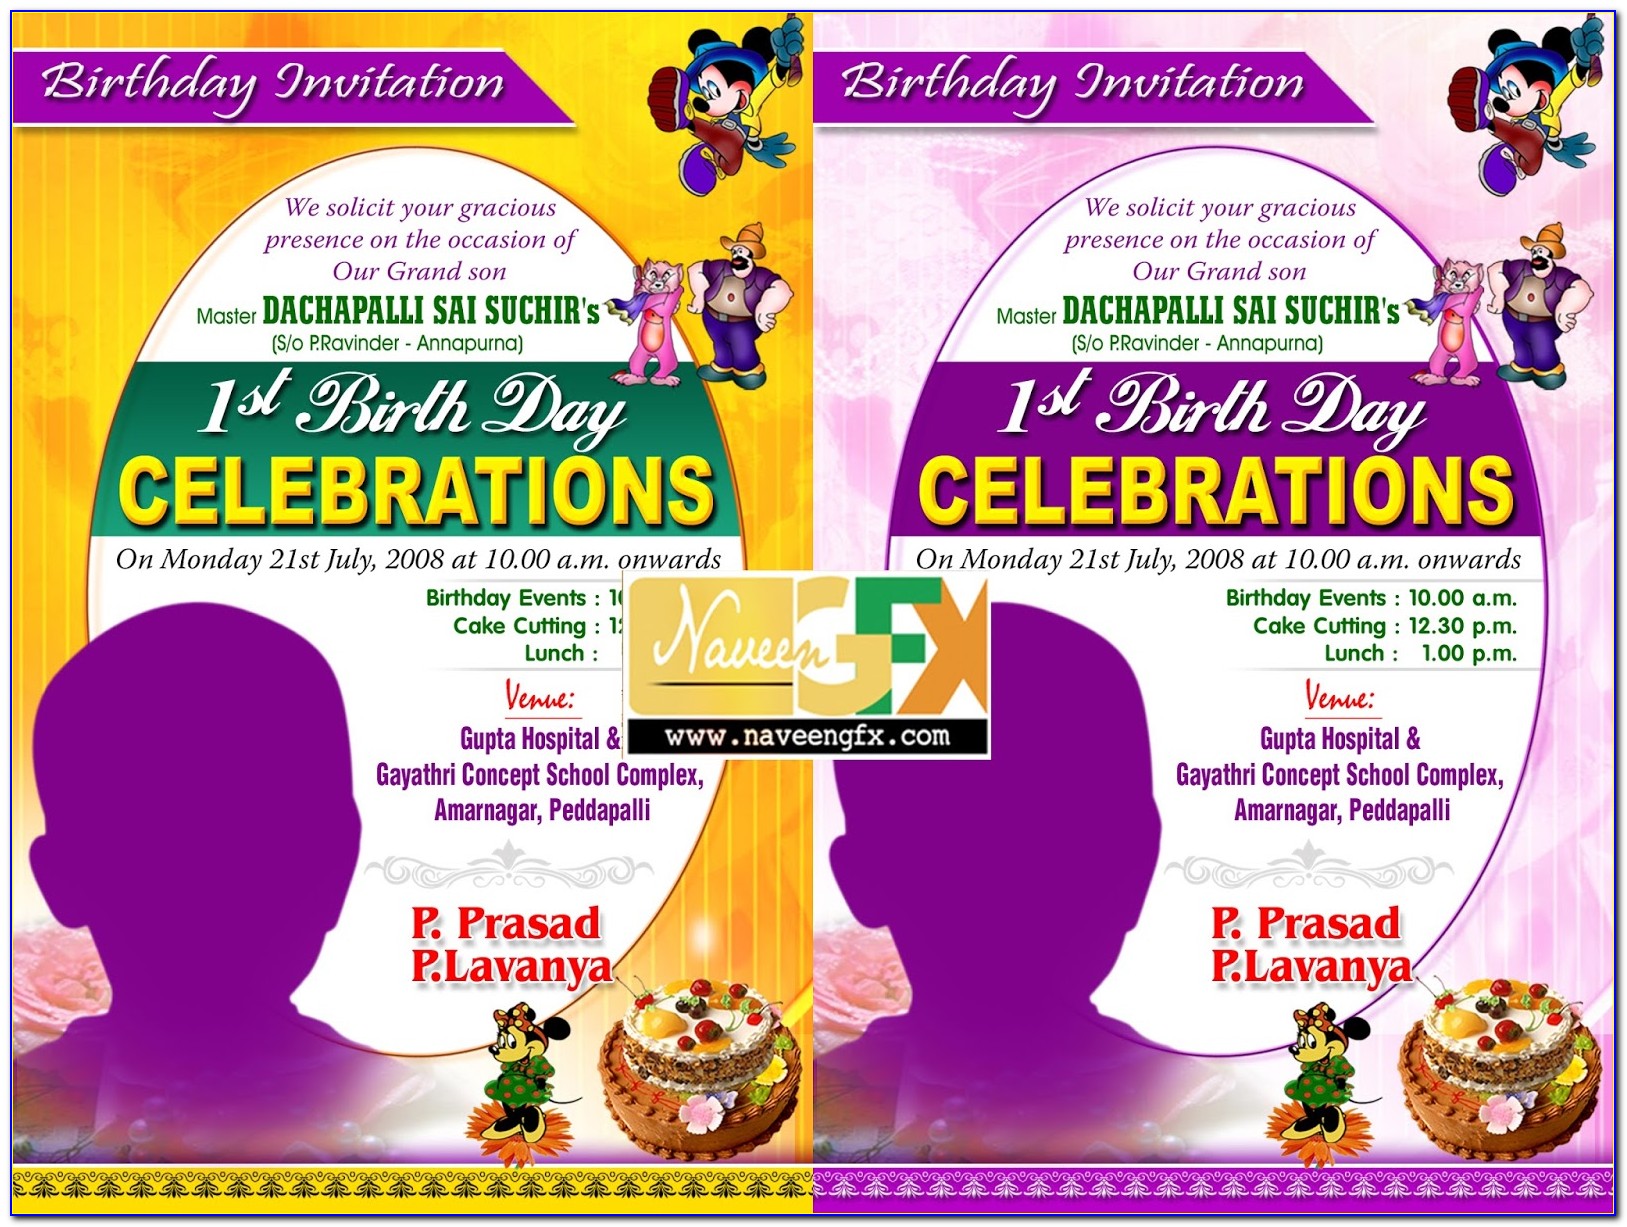 Birthday Invitation Card Download Images